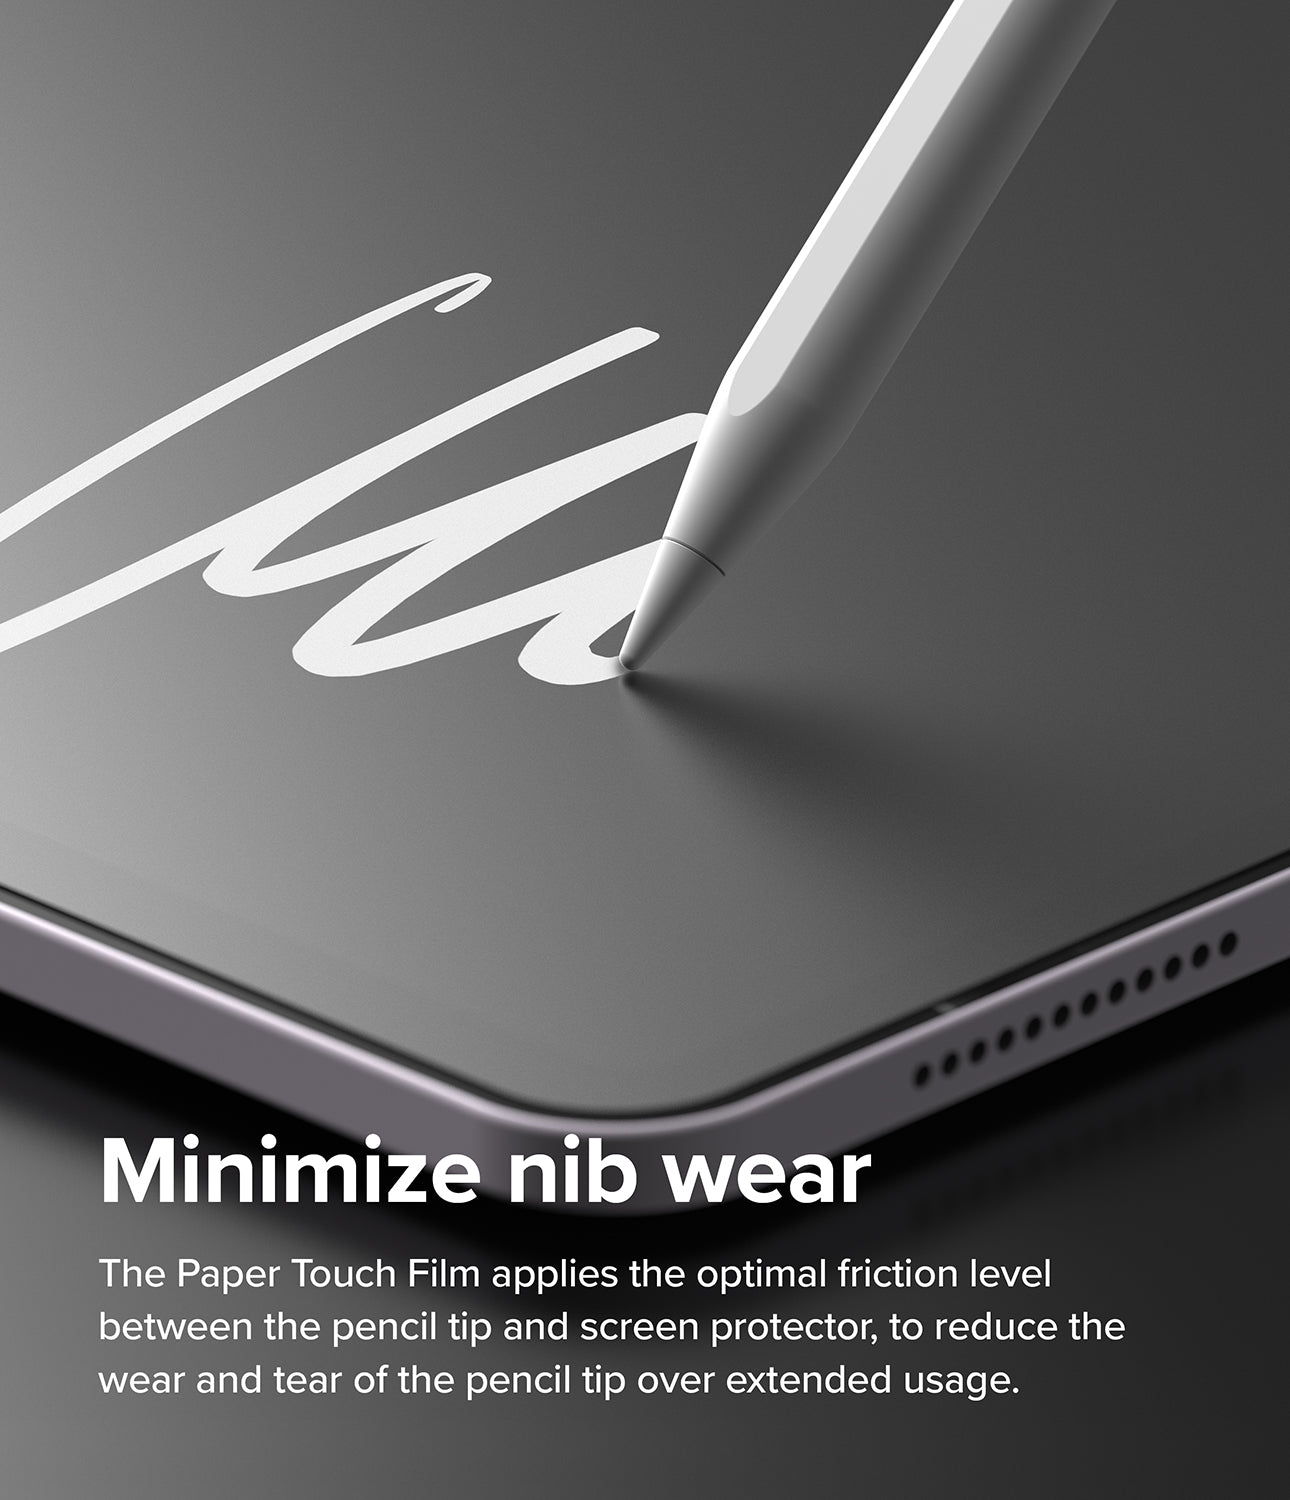 iPad Air 11" (M2) Screen Protector | Paper Touch Film - Soft - Minimize nib wear. The Paper Touch Film applies the optimal friction level between the pencil tip and screen protector, to reduce the wear and tear of the pencil tip over extended usage.